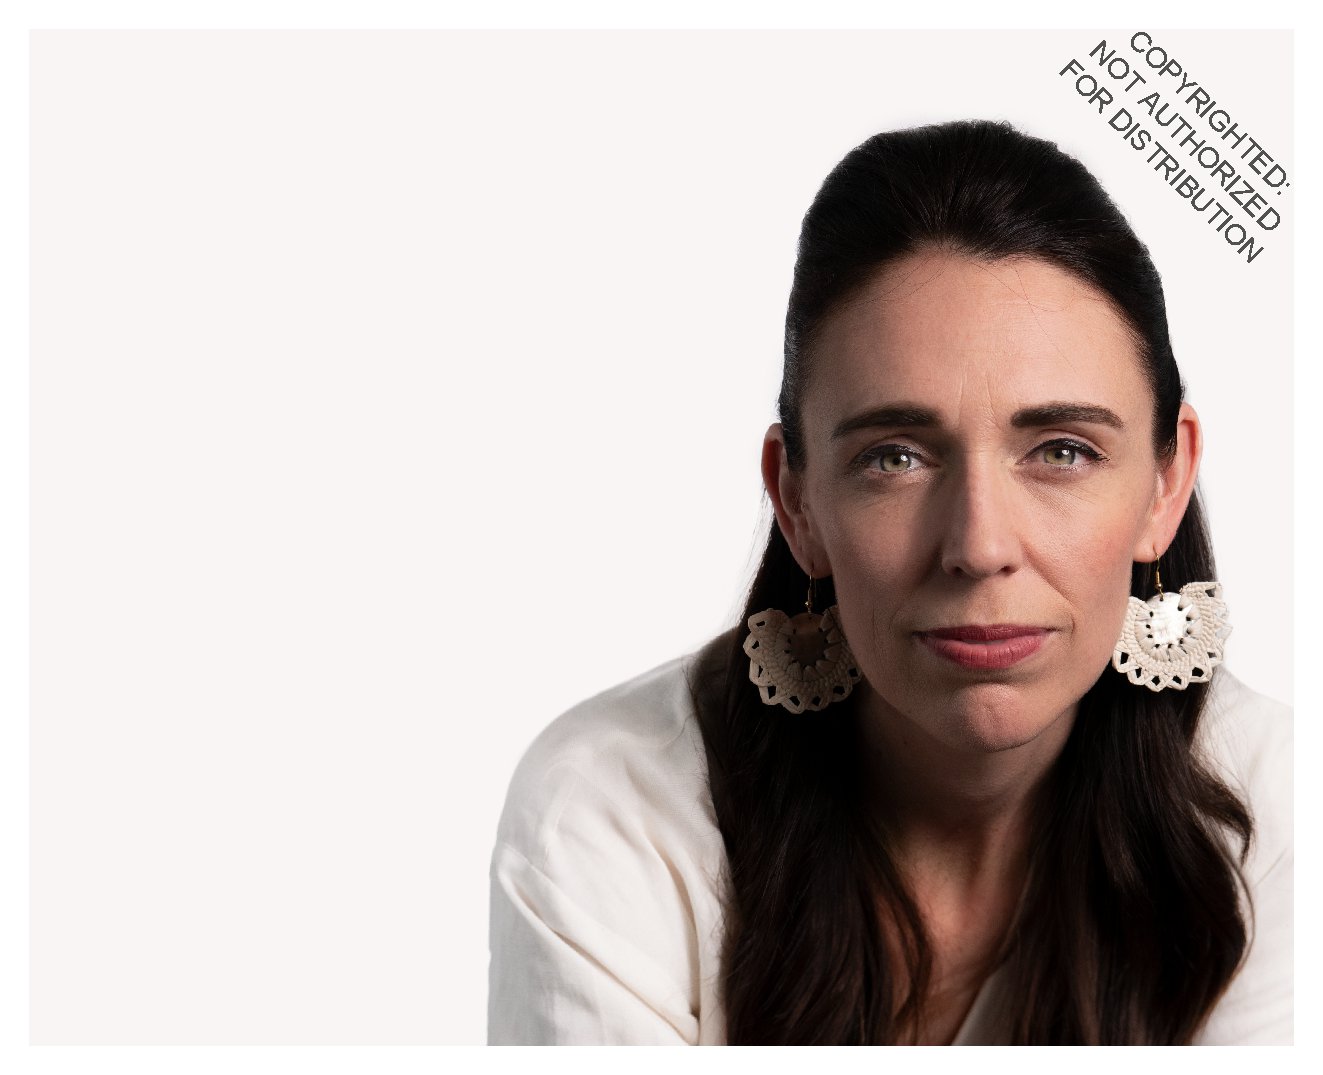 I Know This to Be True: Jacinda Ardern